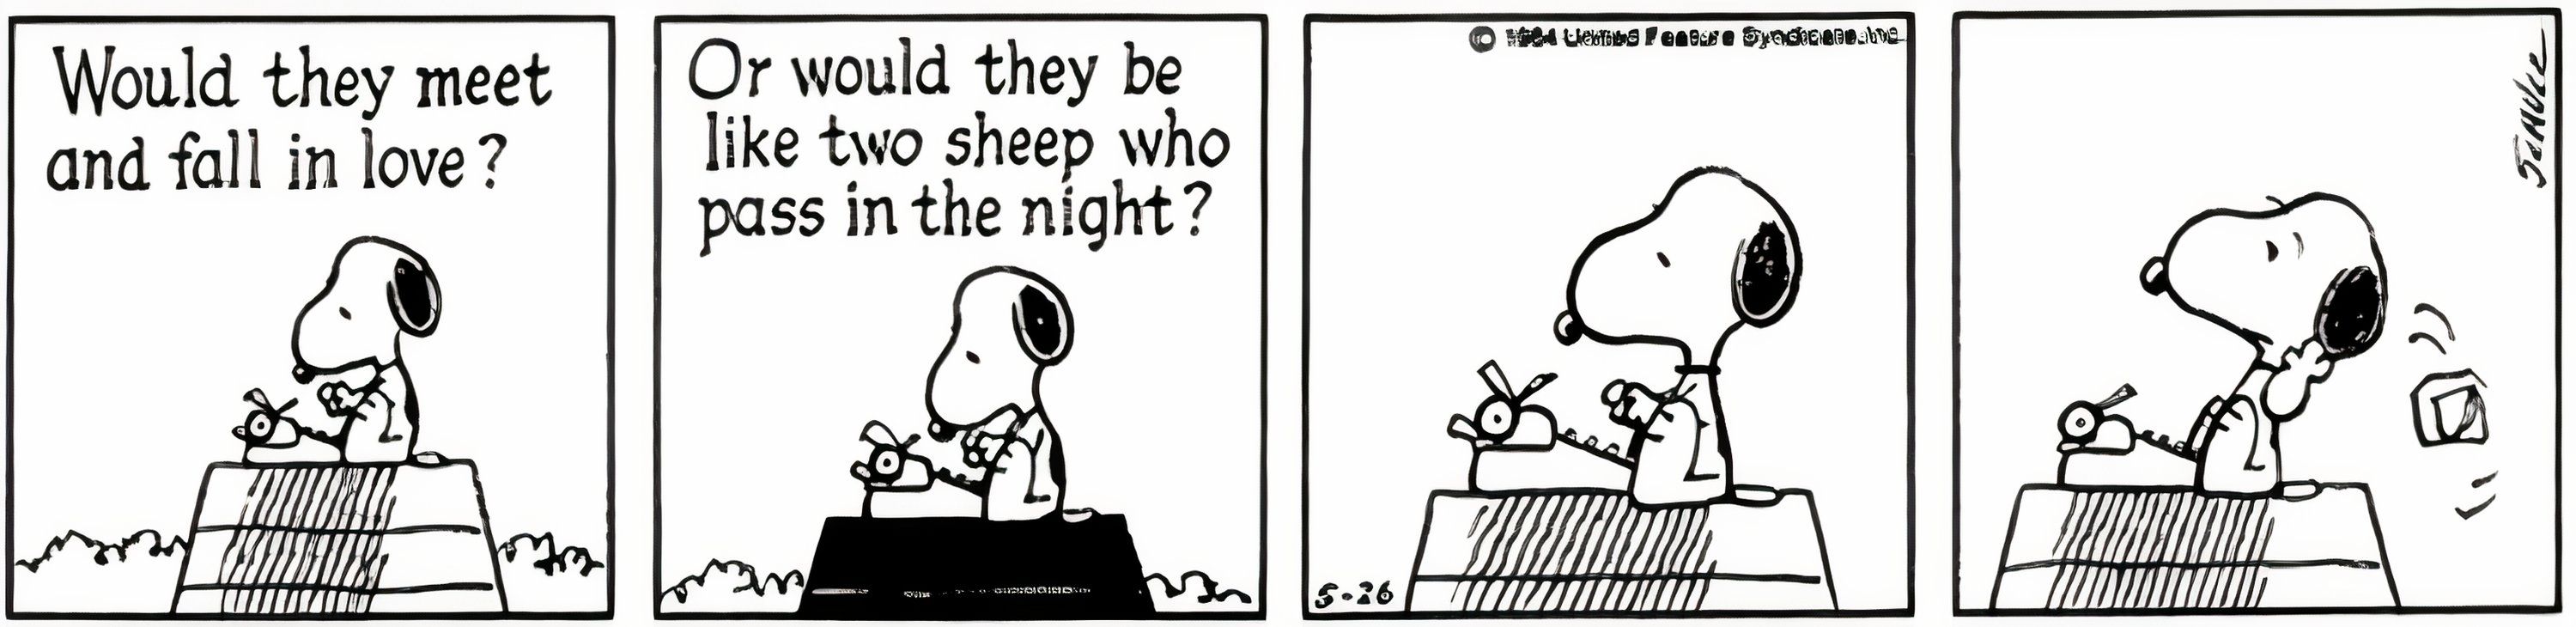 Peanuts, Snoopy writes about 